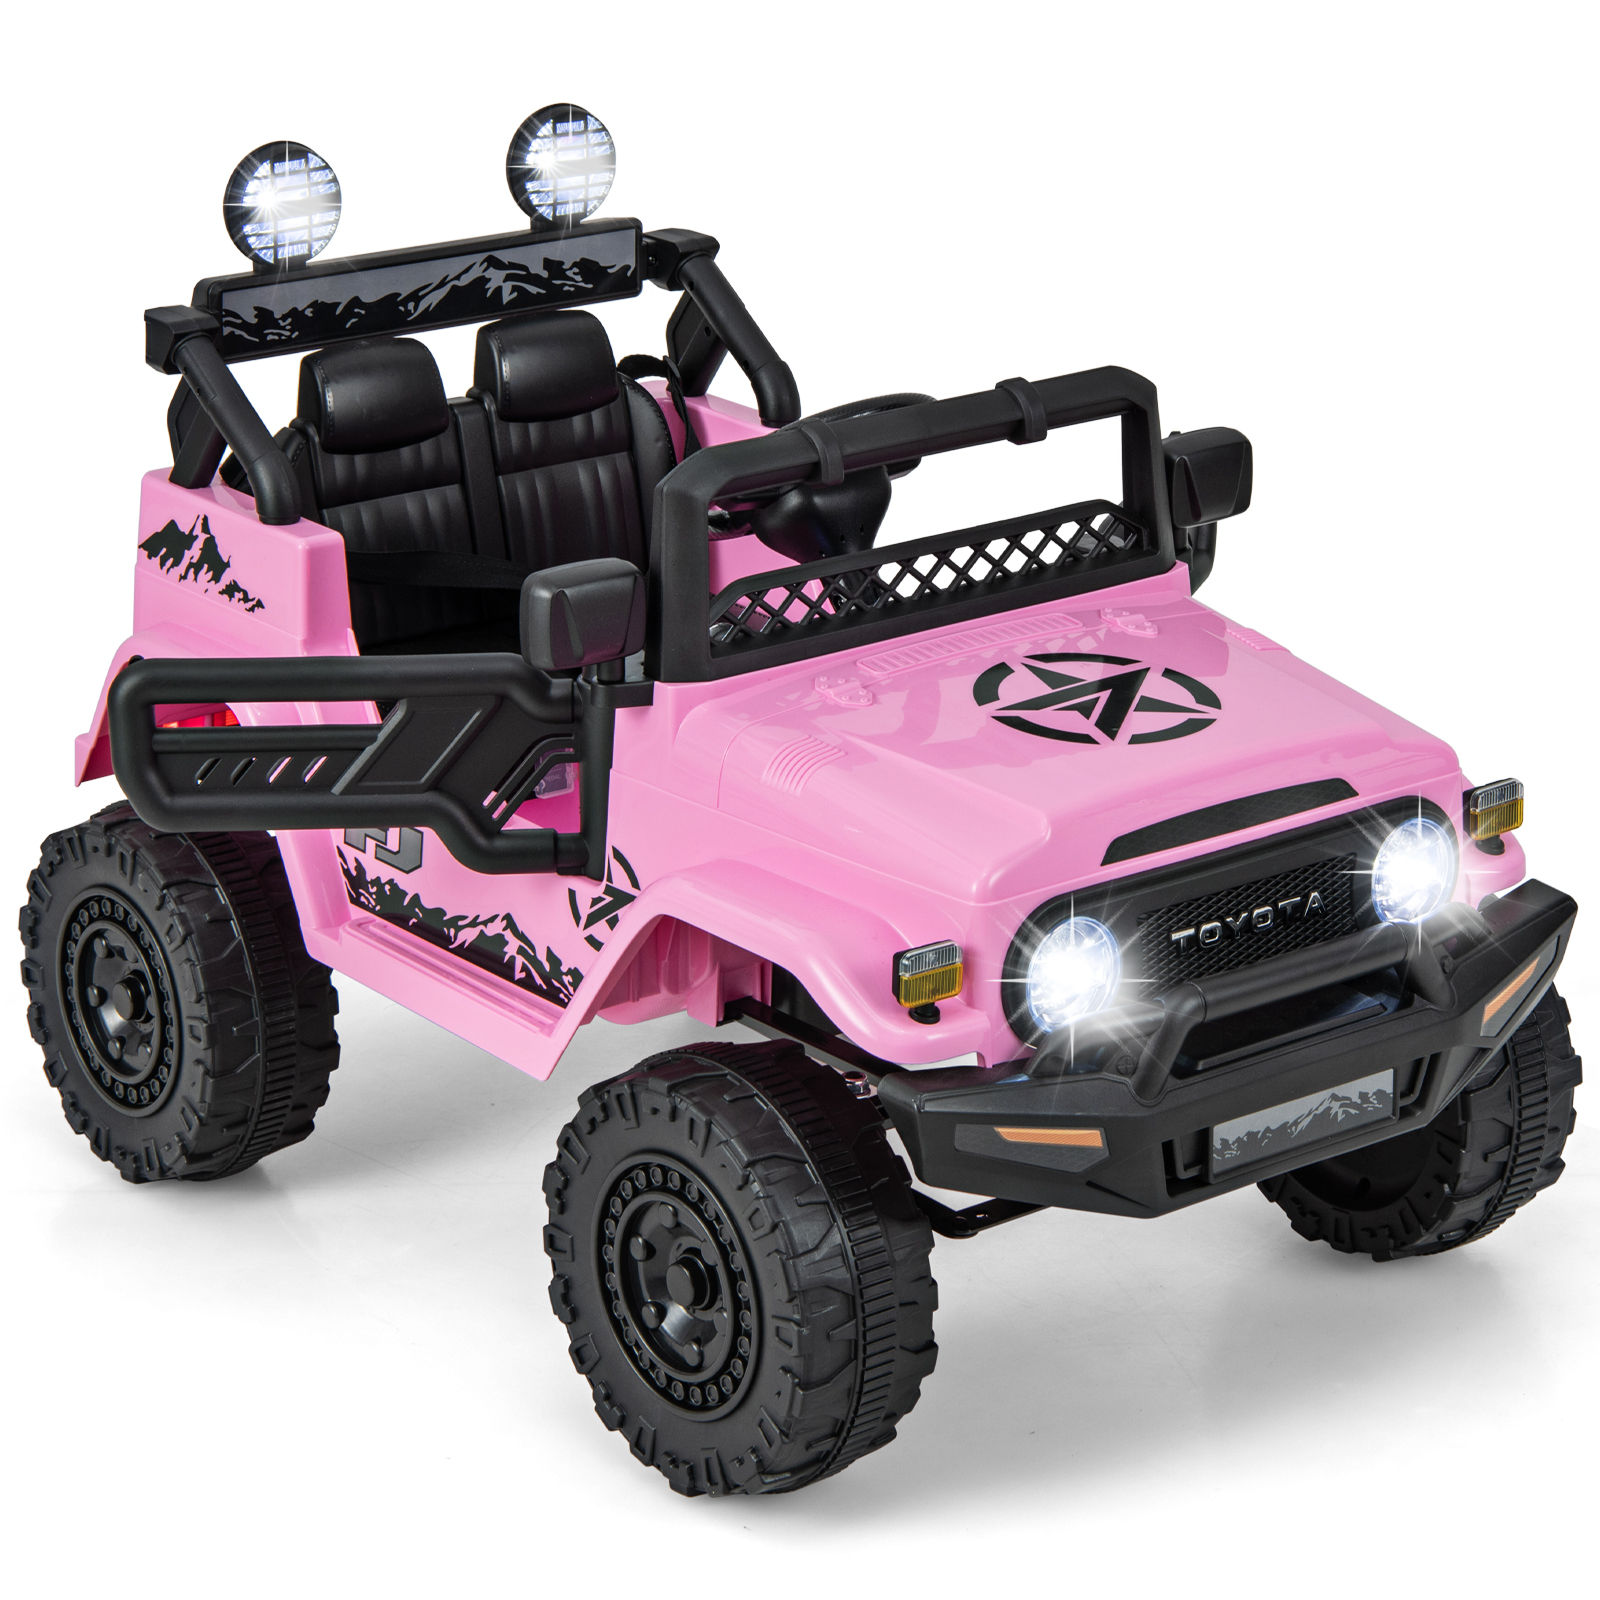 12V 7Ah Licensed Toyota FJ Cruiser Electric Car with Remote Control-Pink